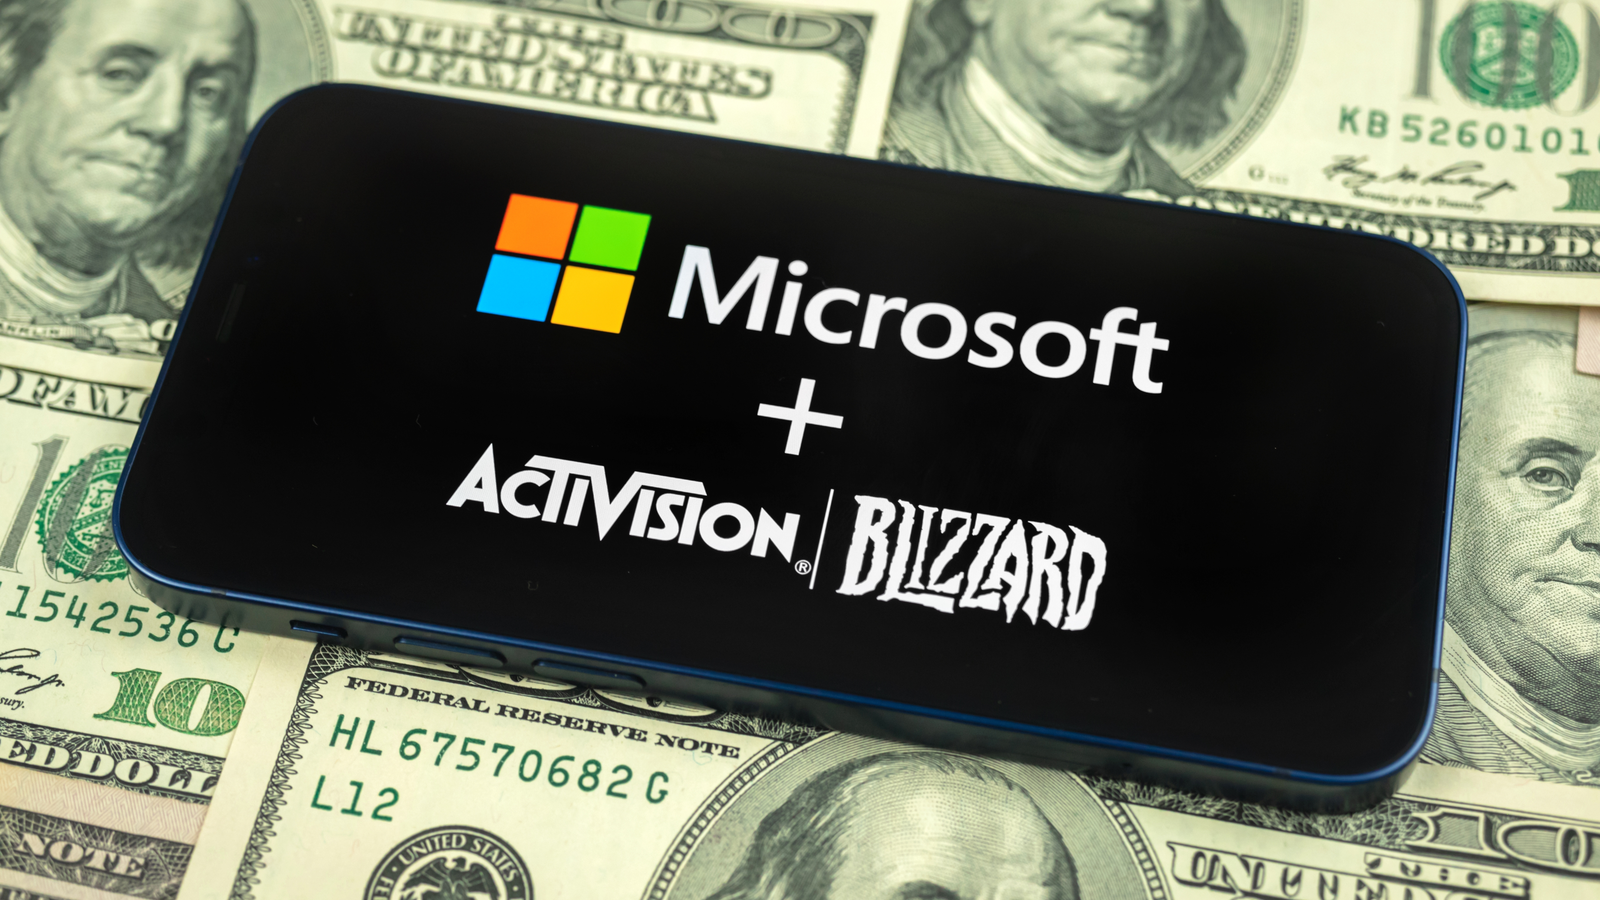 Microsoft and Activision Blizzard logo on smartphone screen close-up